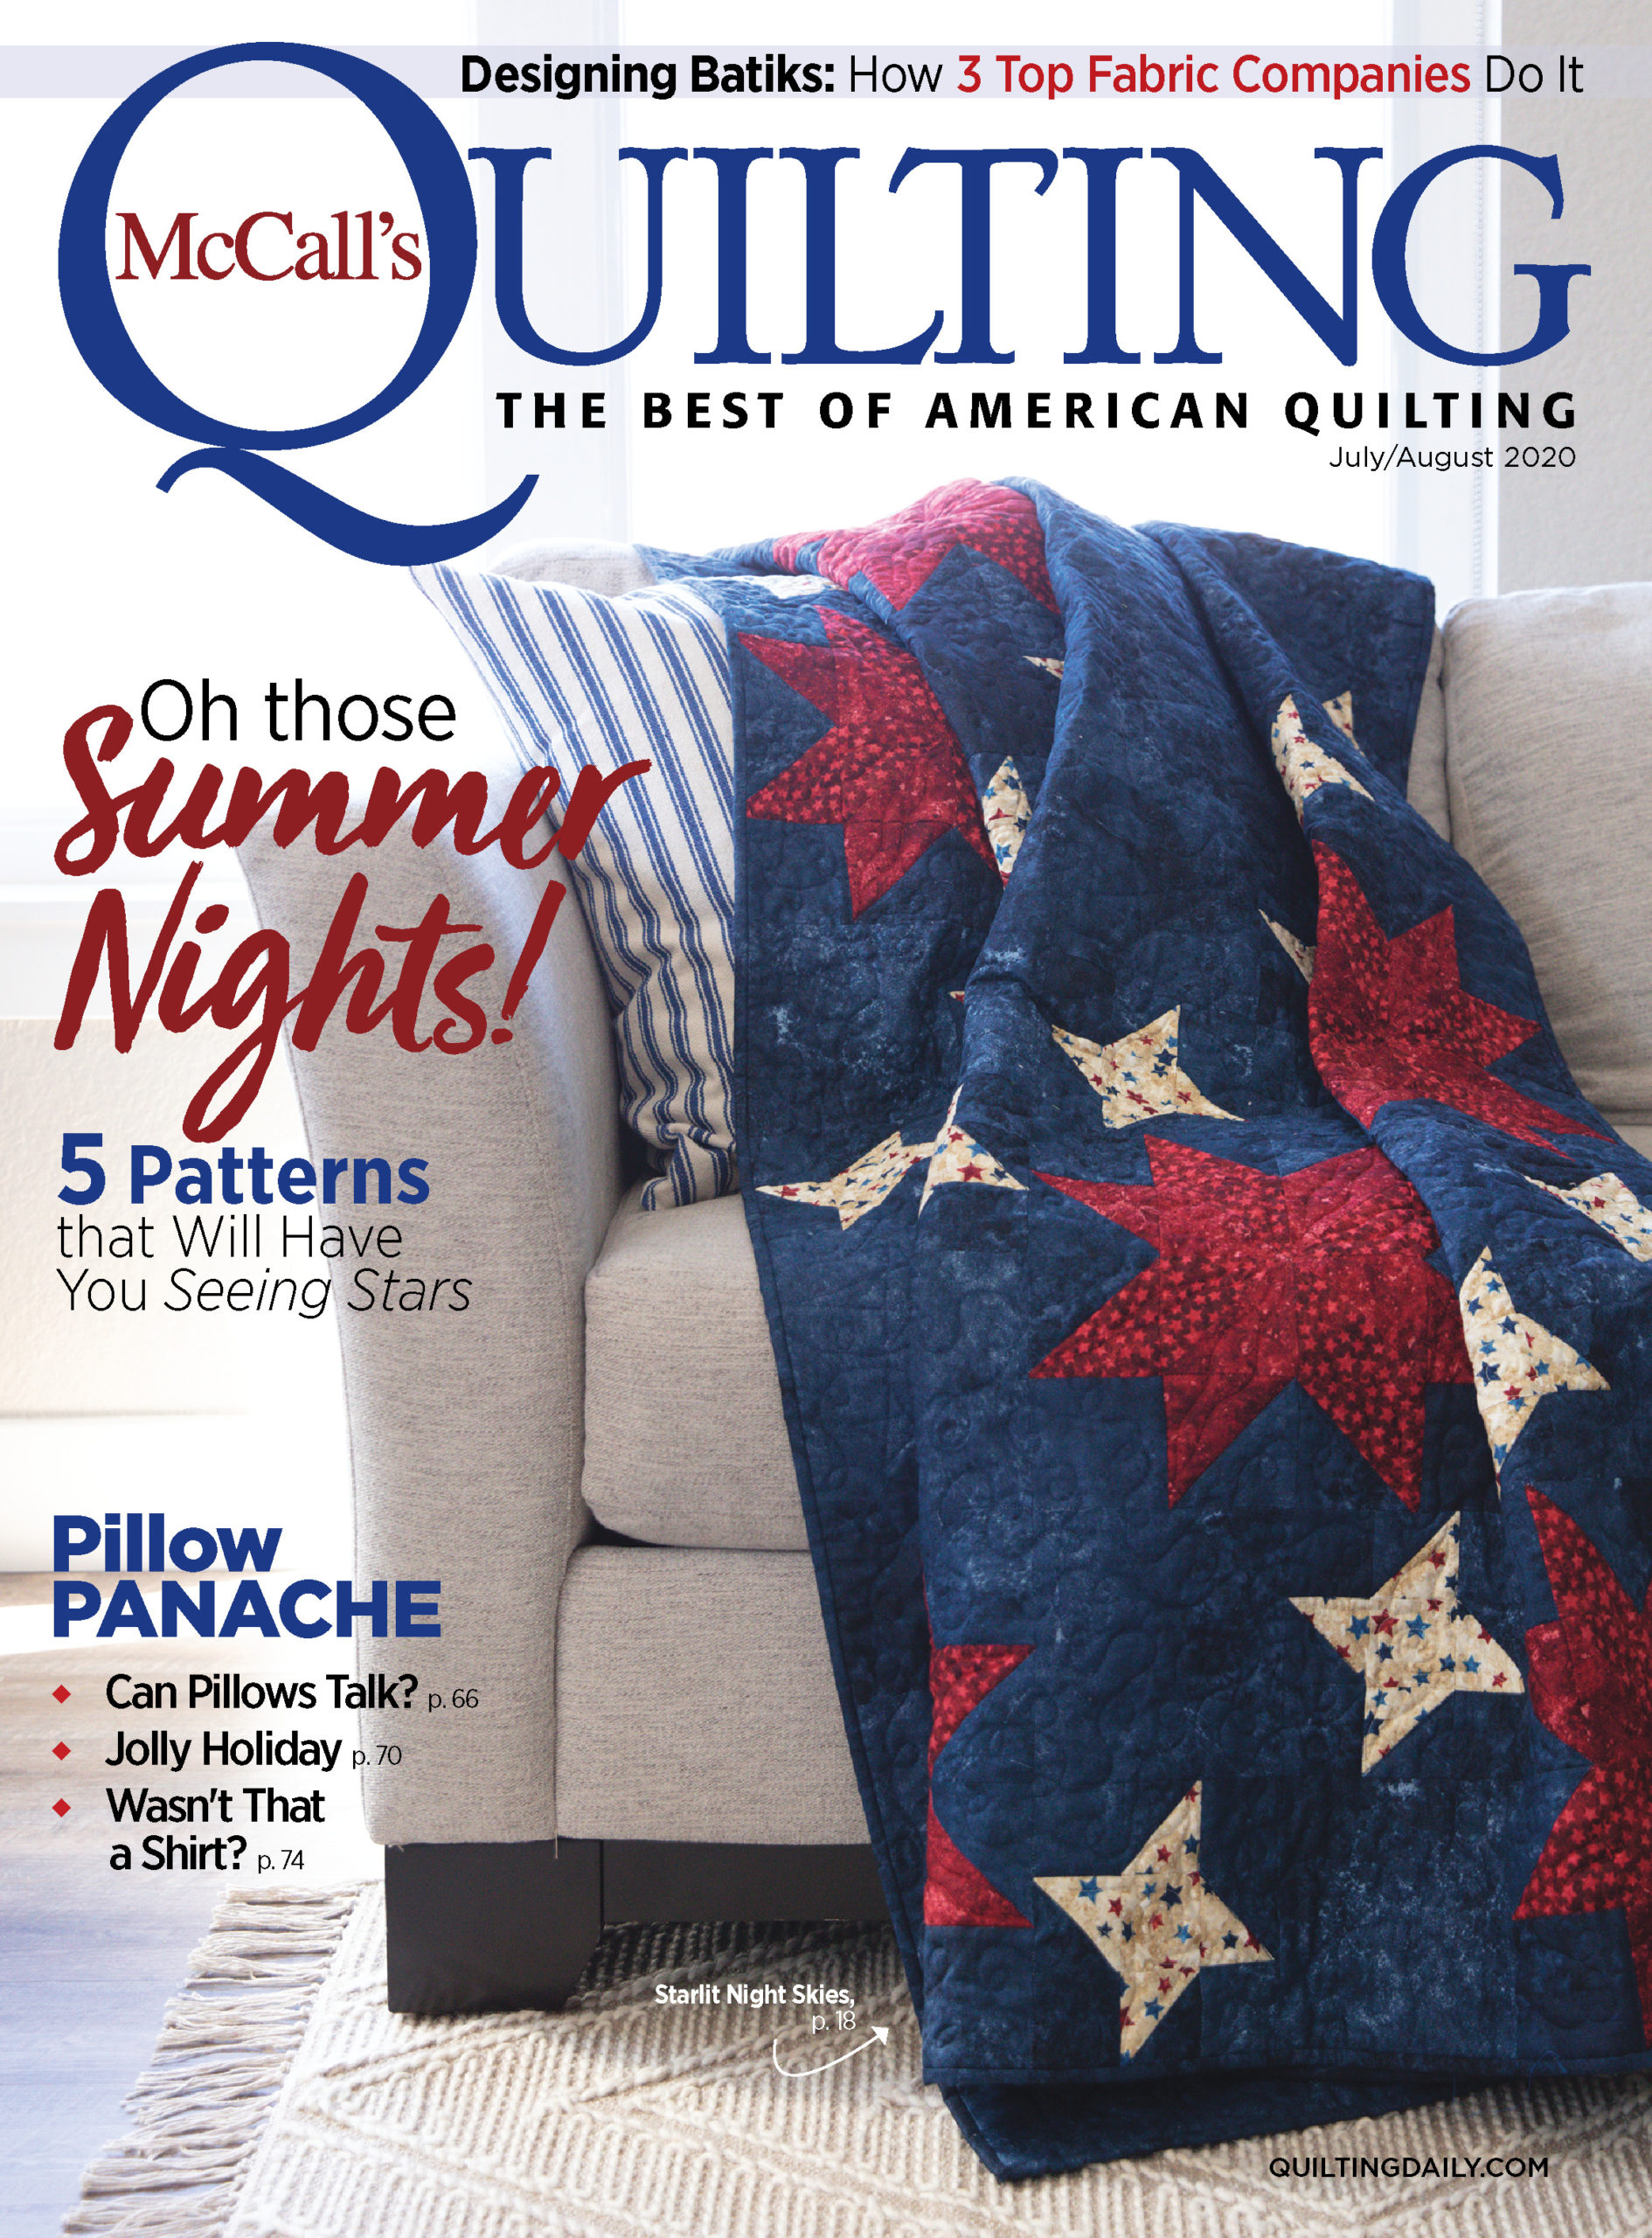 McCall's Quilting July/August 2020 